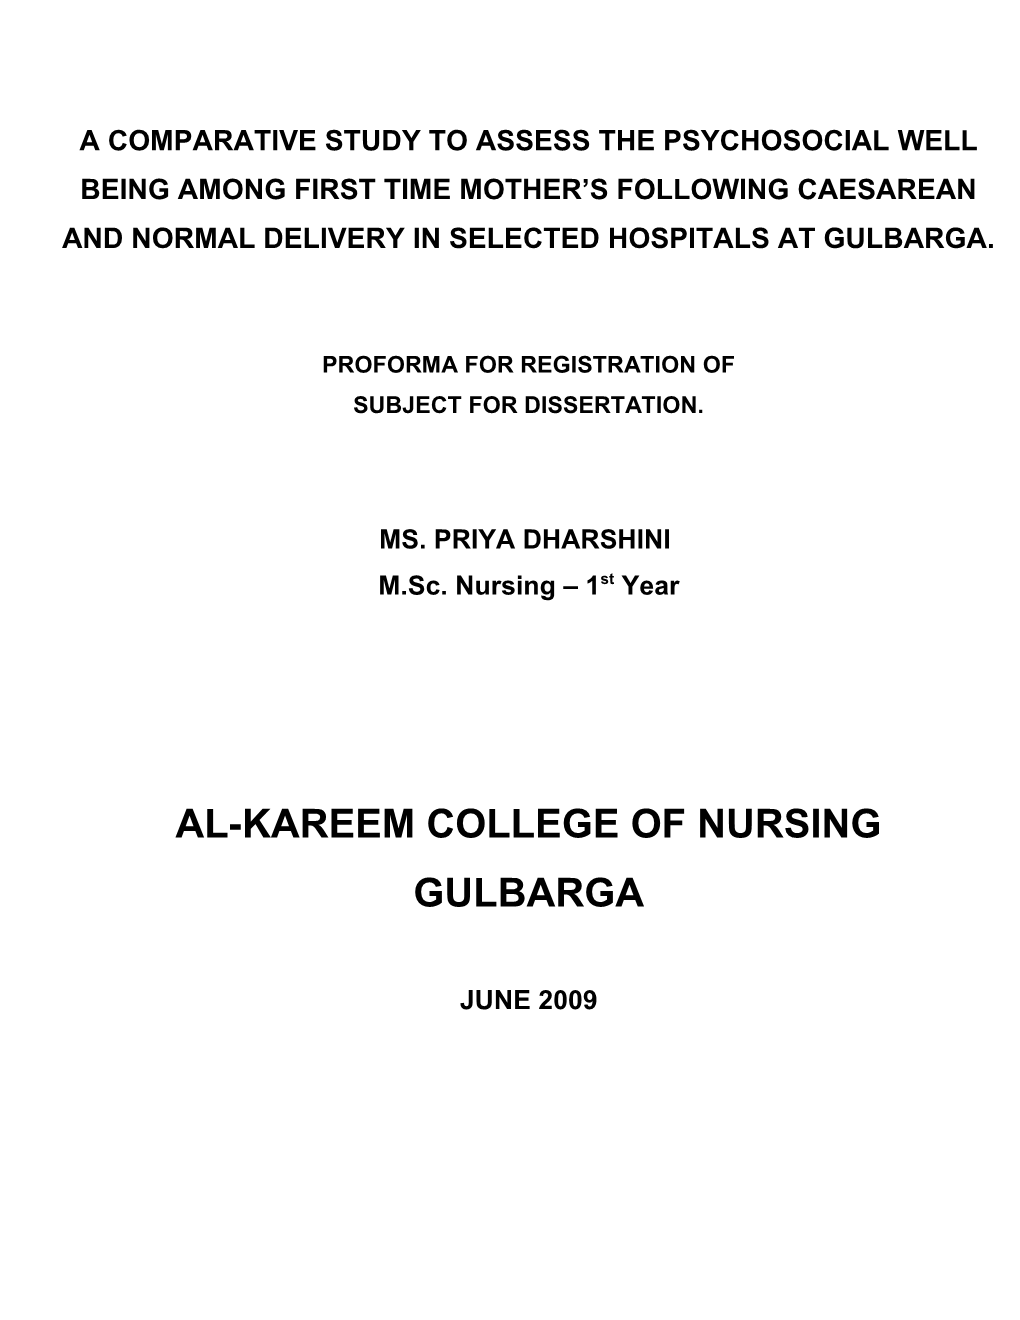 A Comparative Study to Assess the Psychosocial Well Being Among First Time Mother S Following